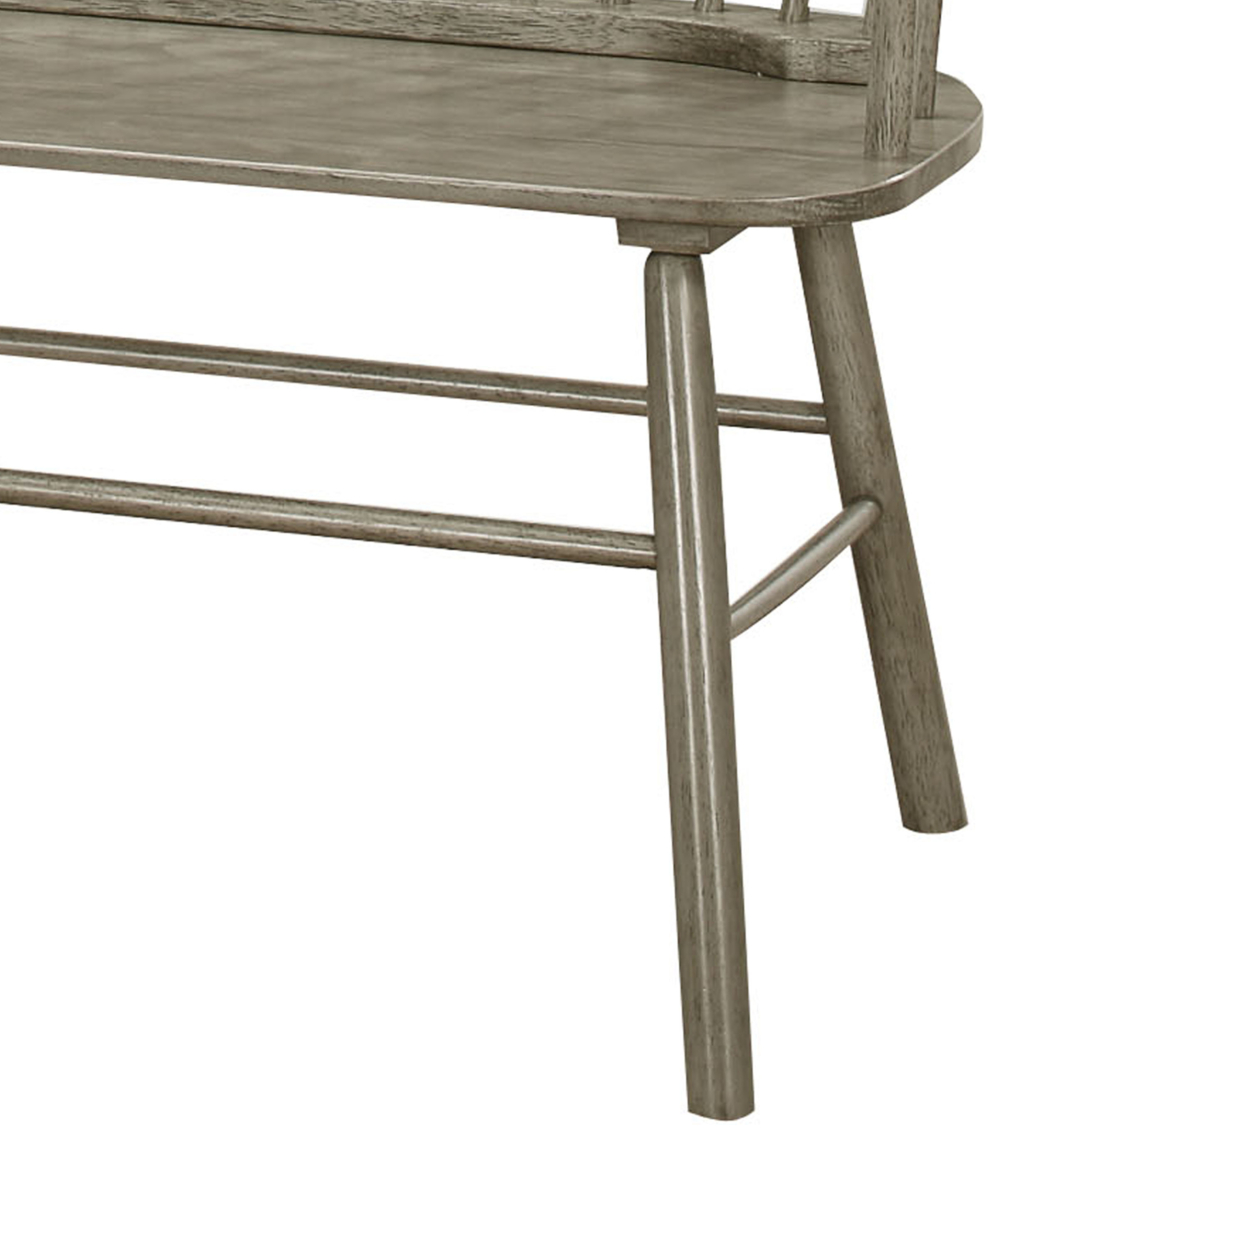 Transitional Style Curved Design Spindle Back Bench With Splayed Legs,Gray- Saltoro Sherpi